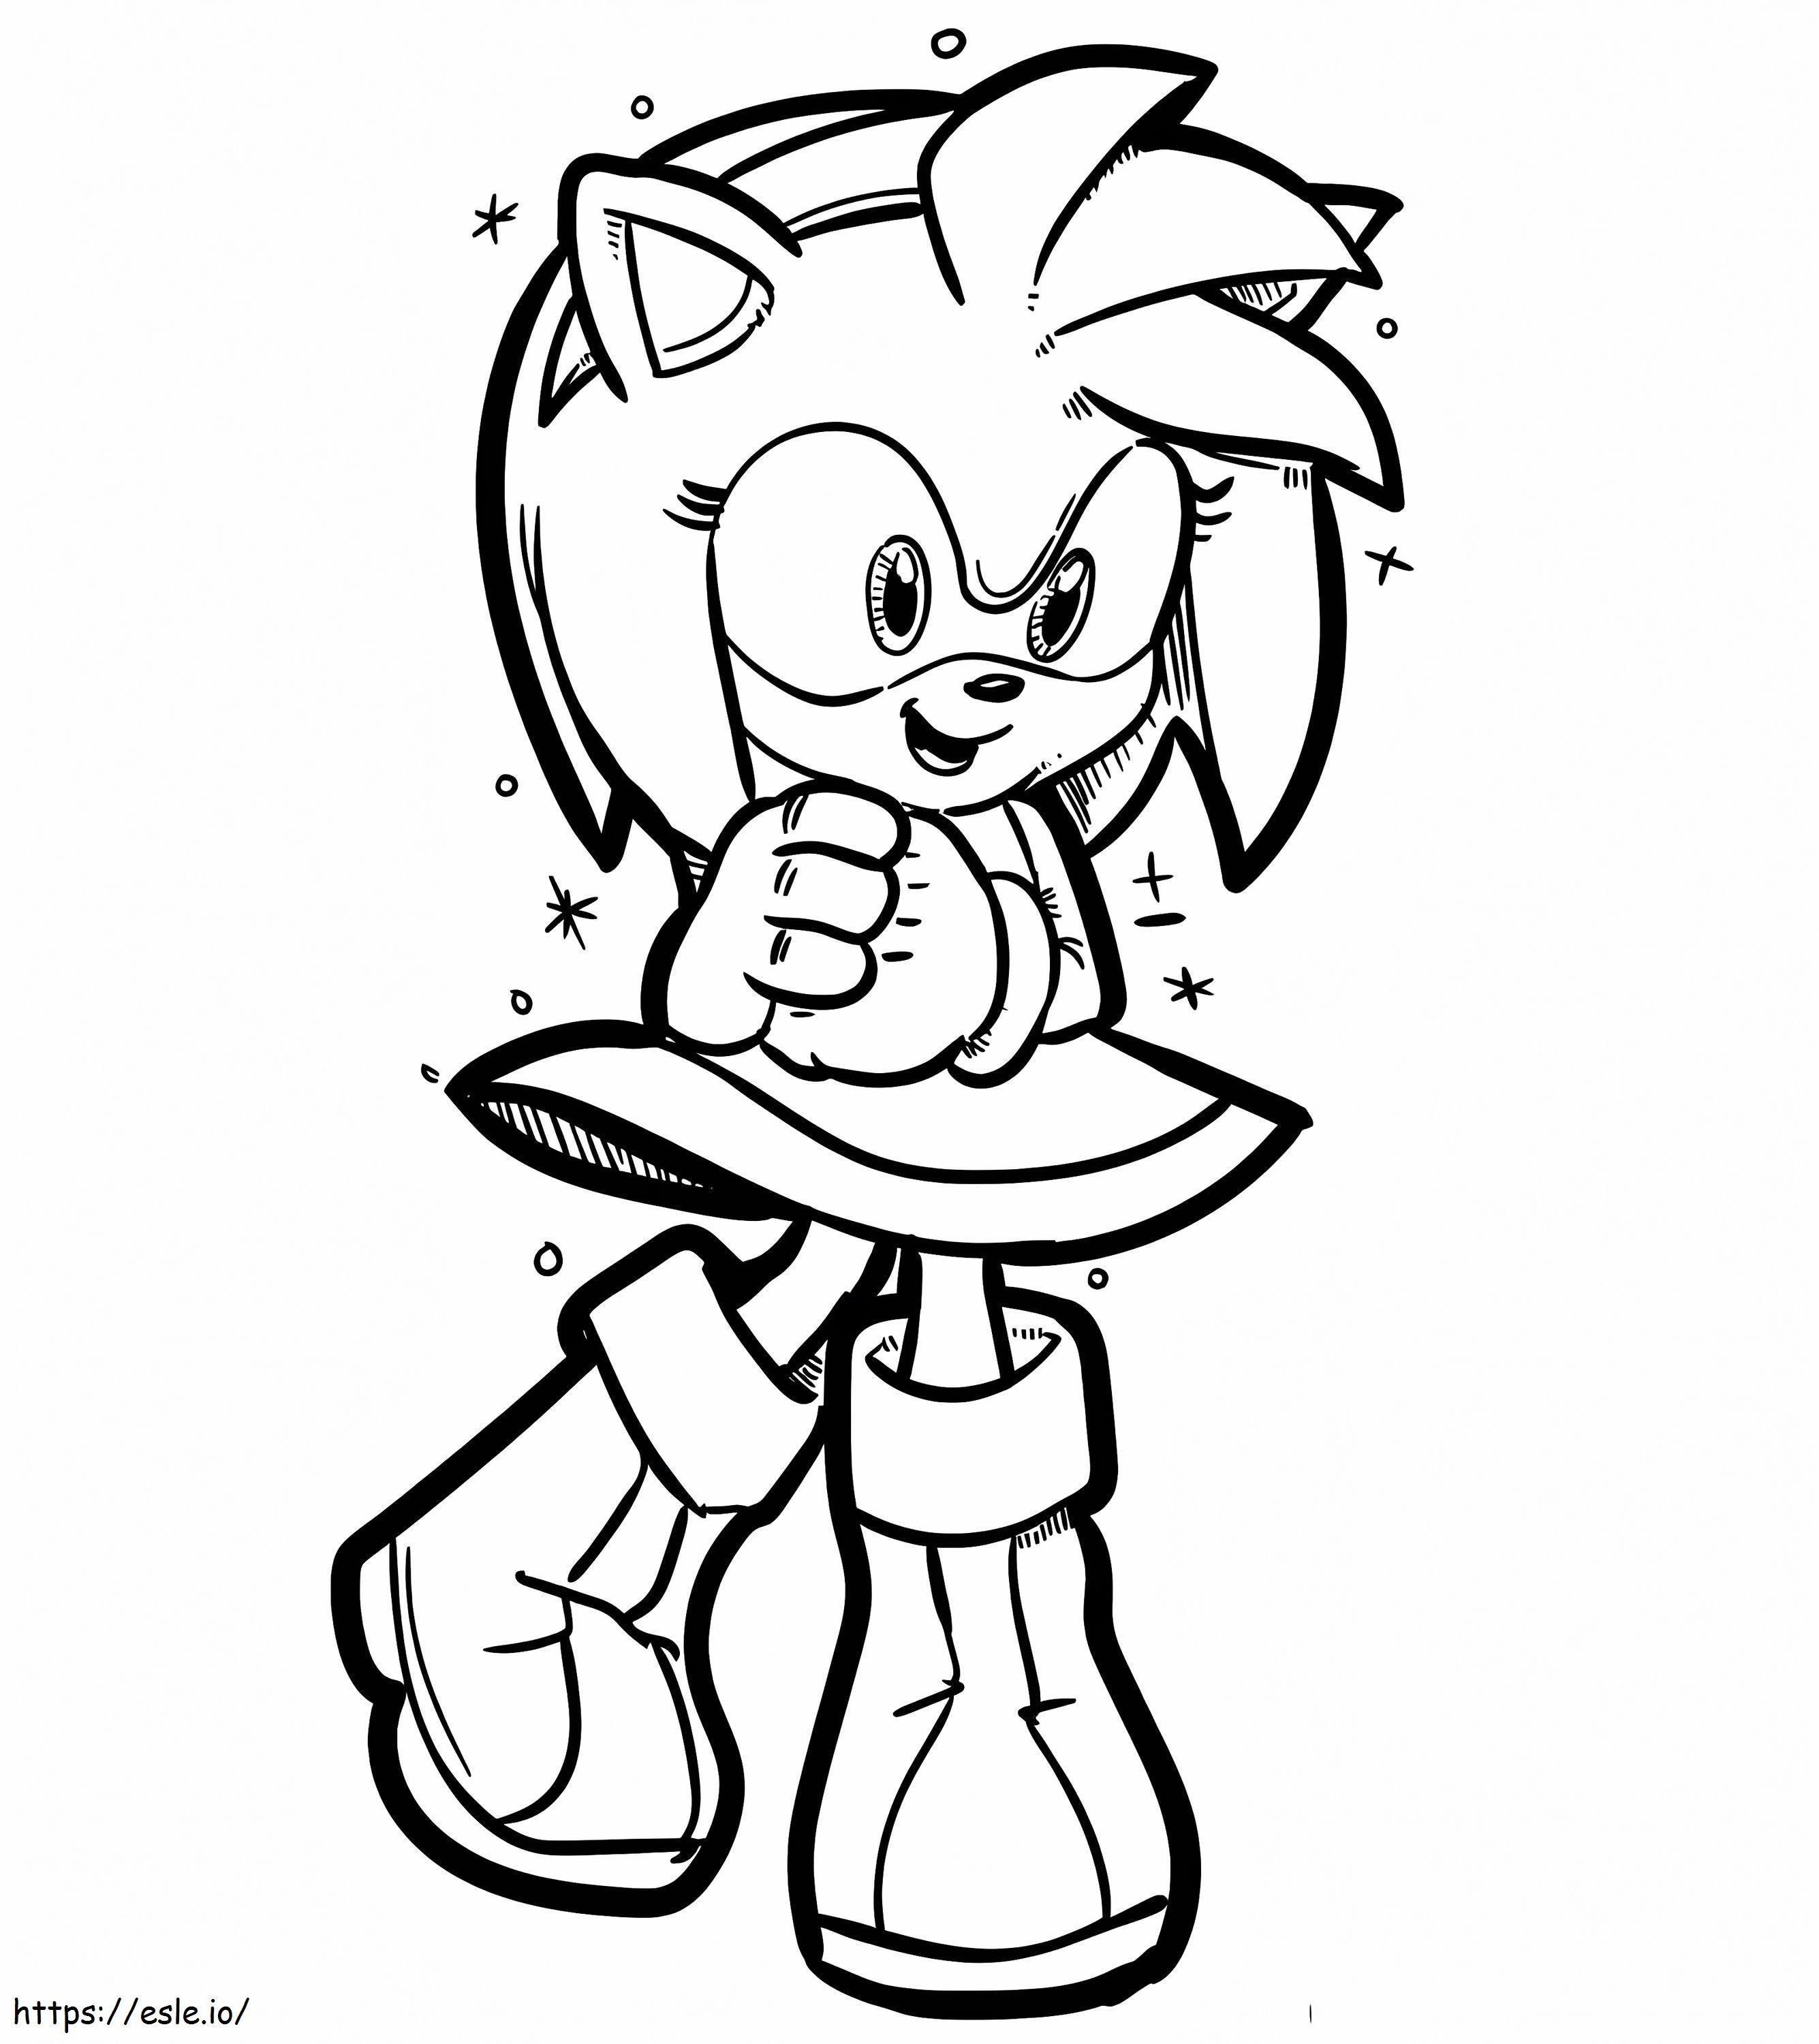 Smiling Amy Rose coloring page